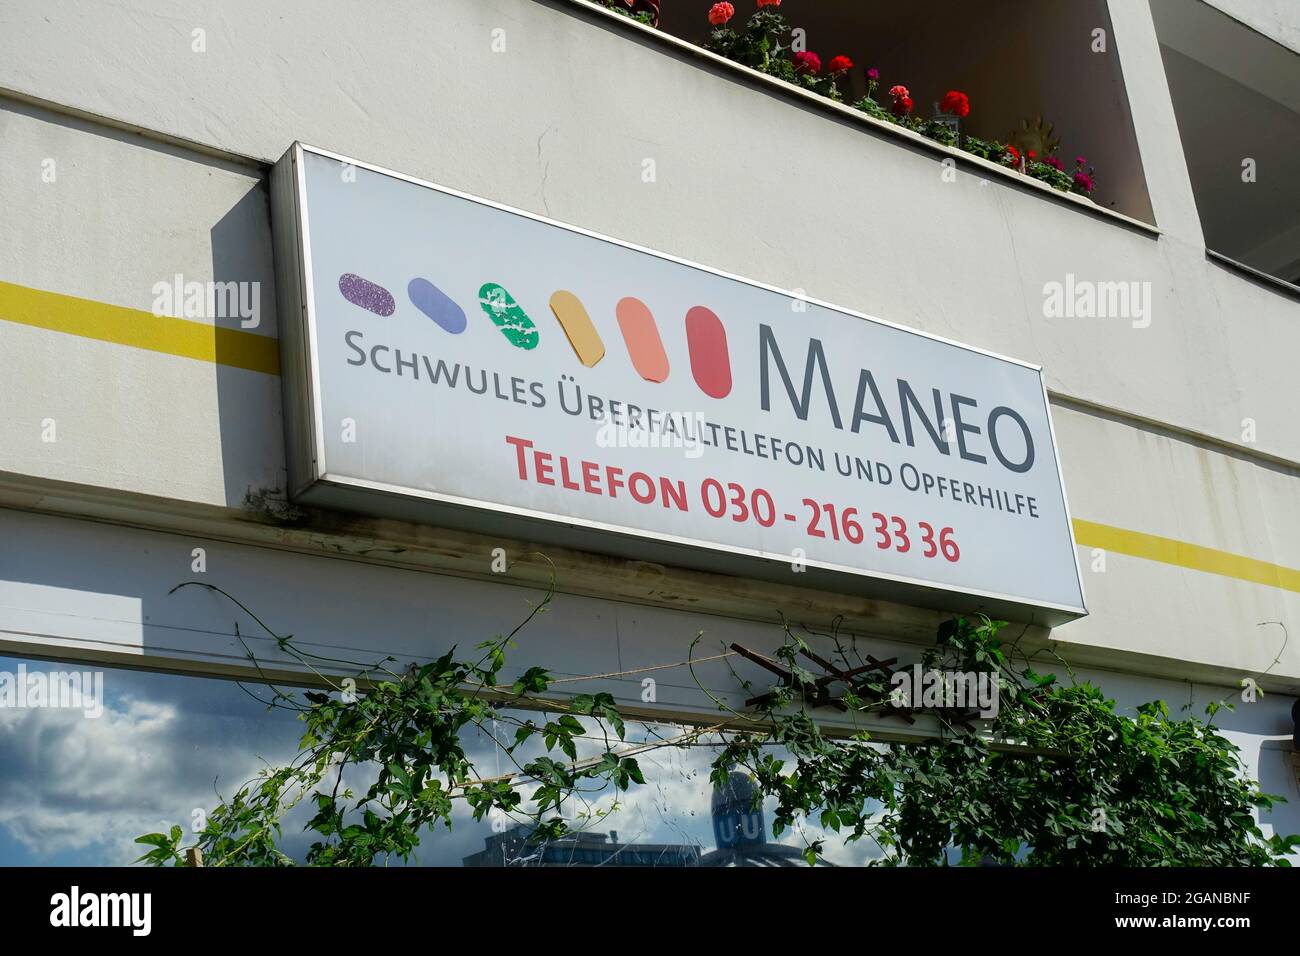 Maneo, gay attack phone and victim assistance, Berlin Stock Photo